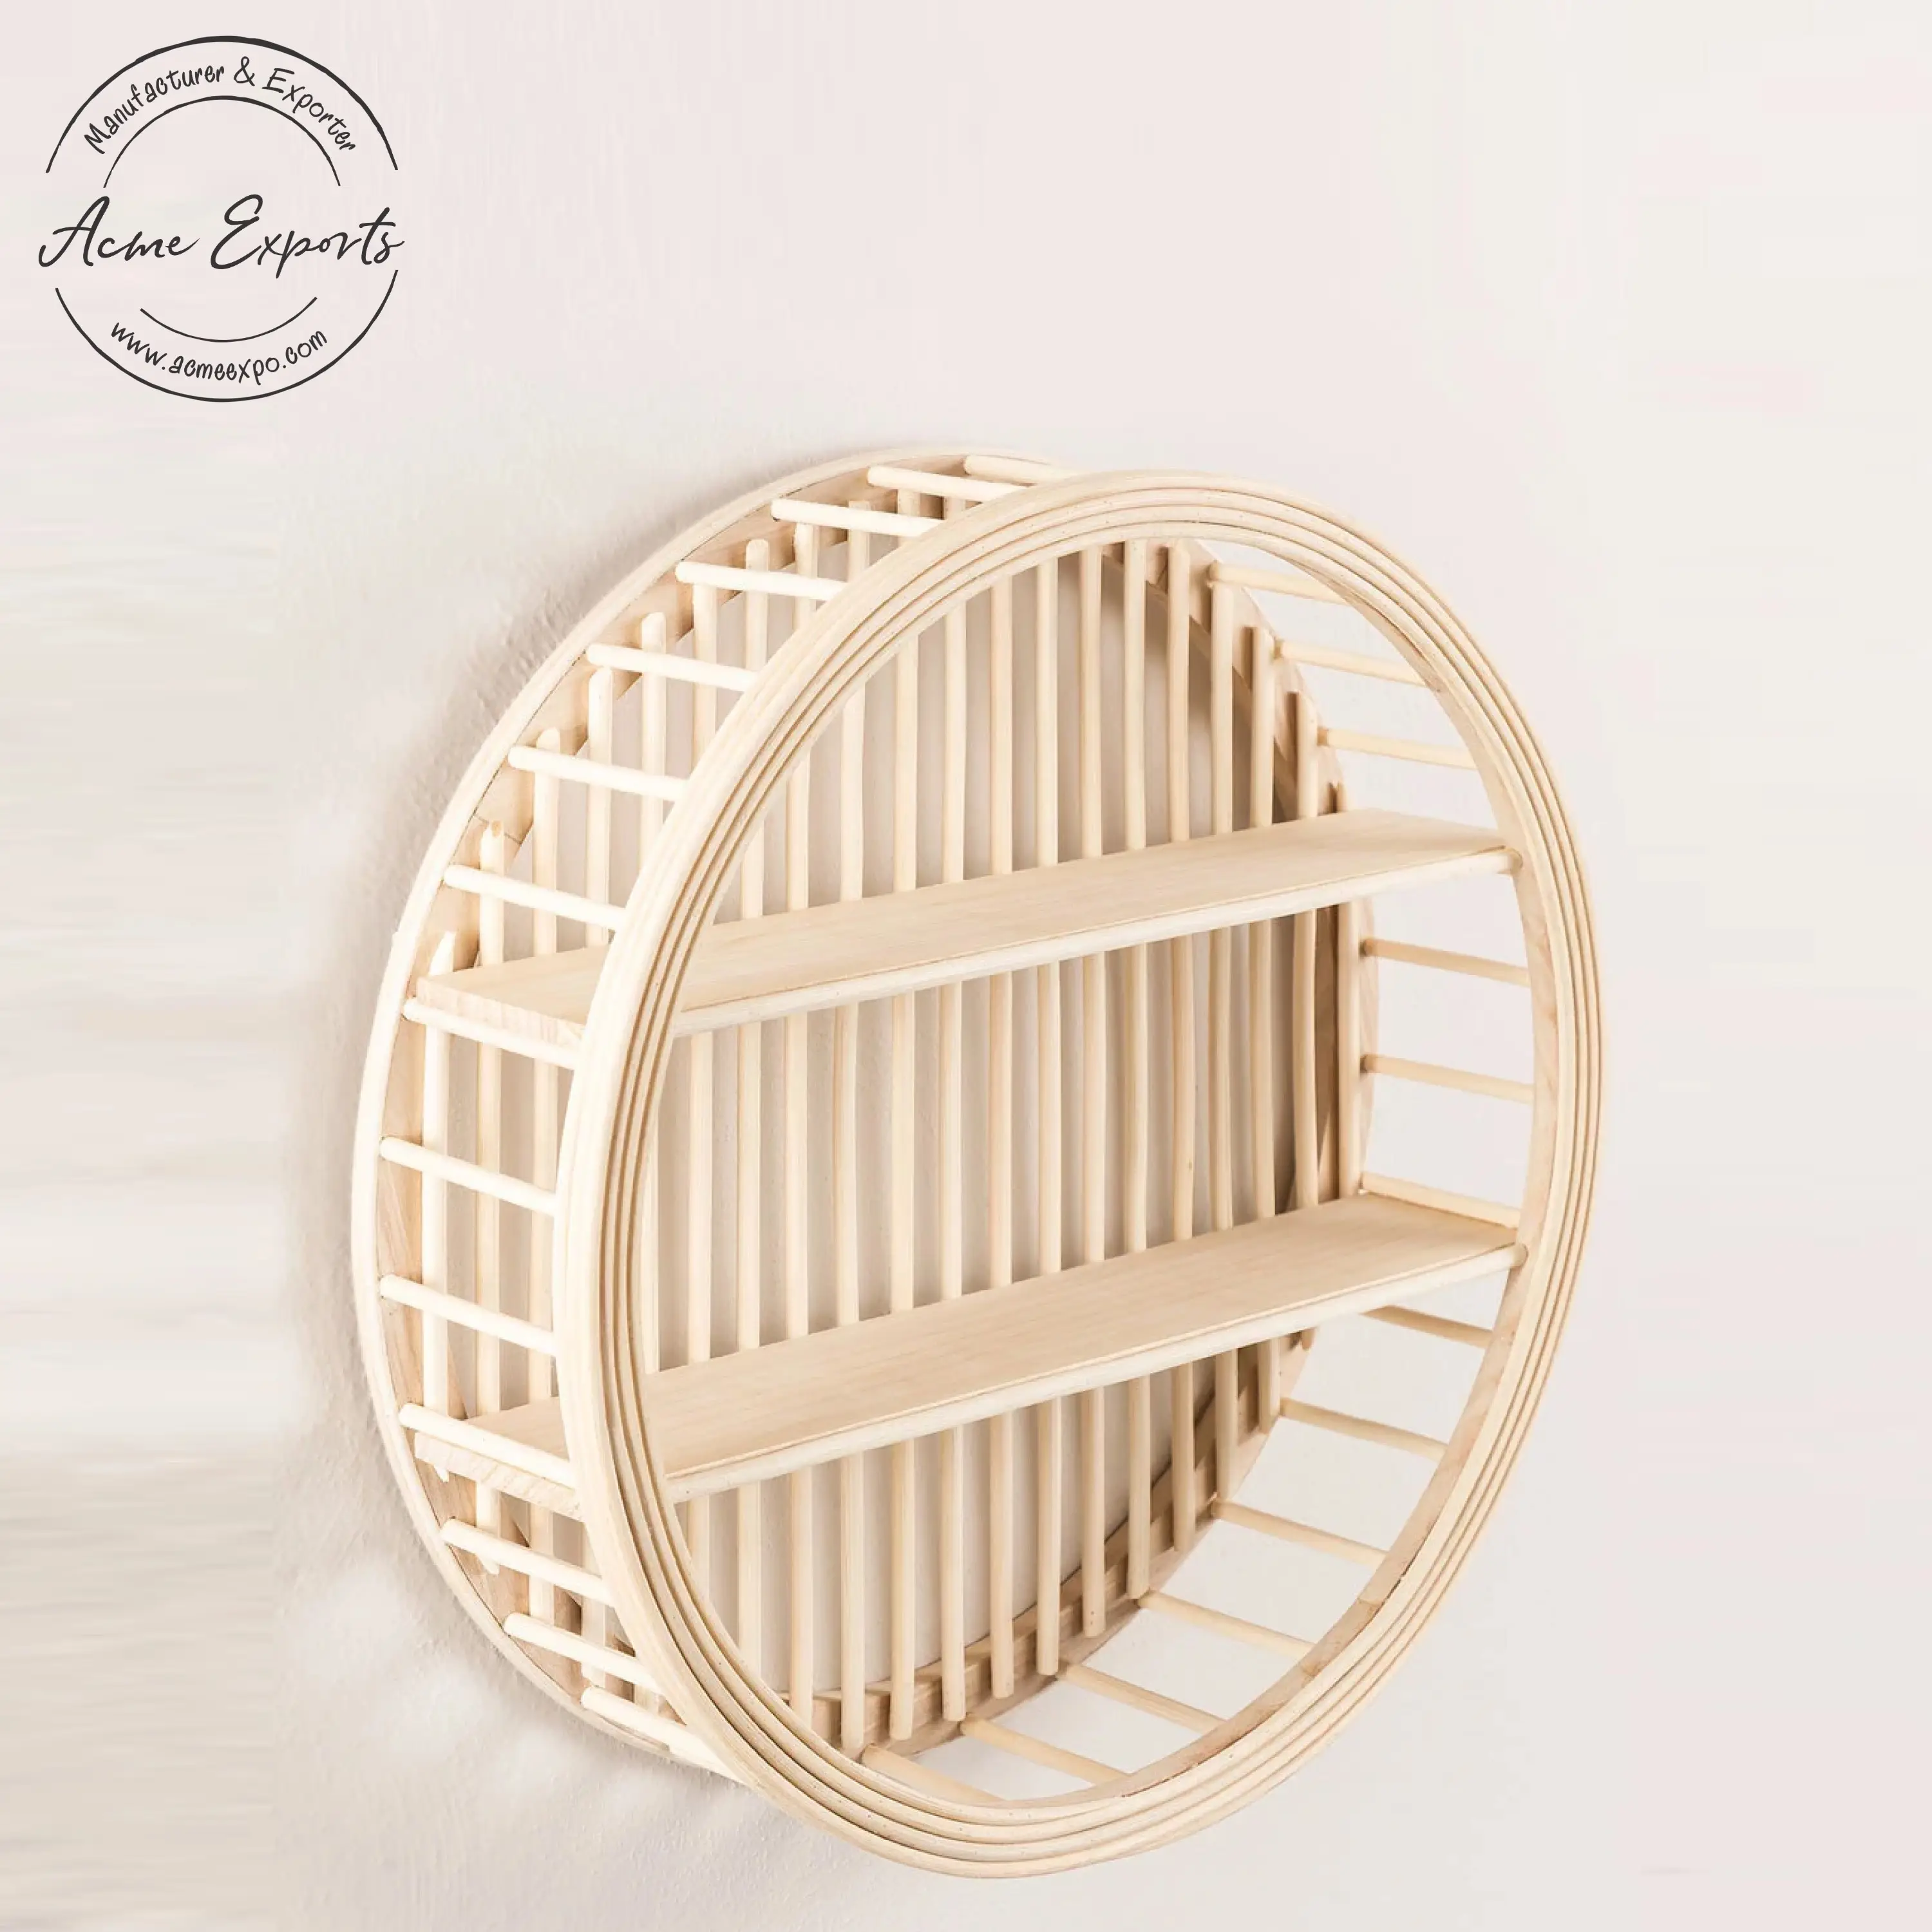 Wholesale Handmade Rustic 2 Tier Large Round Rattan Bamboo Wall Shelf with Natural Finished Used for Minimalist Interior Decor.